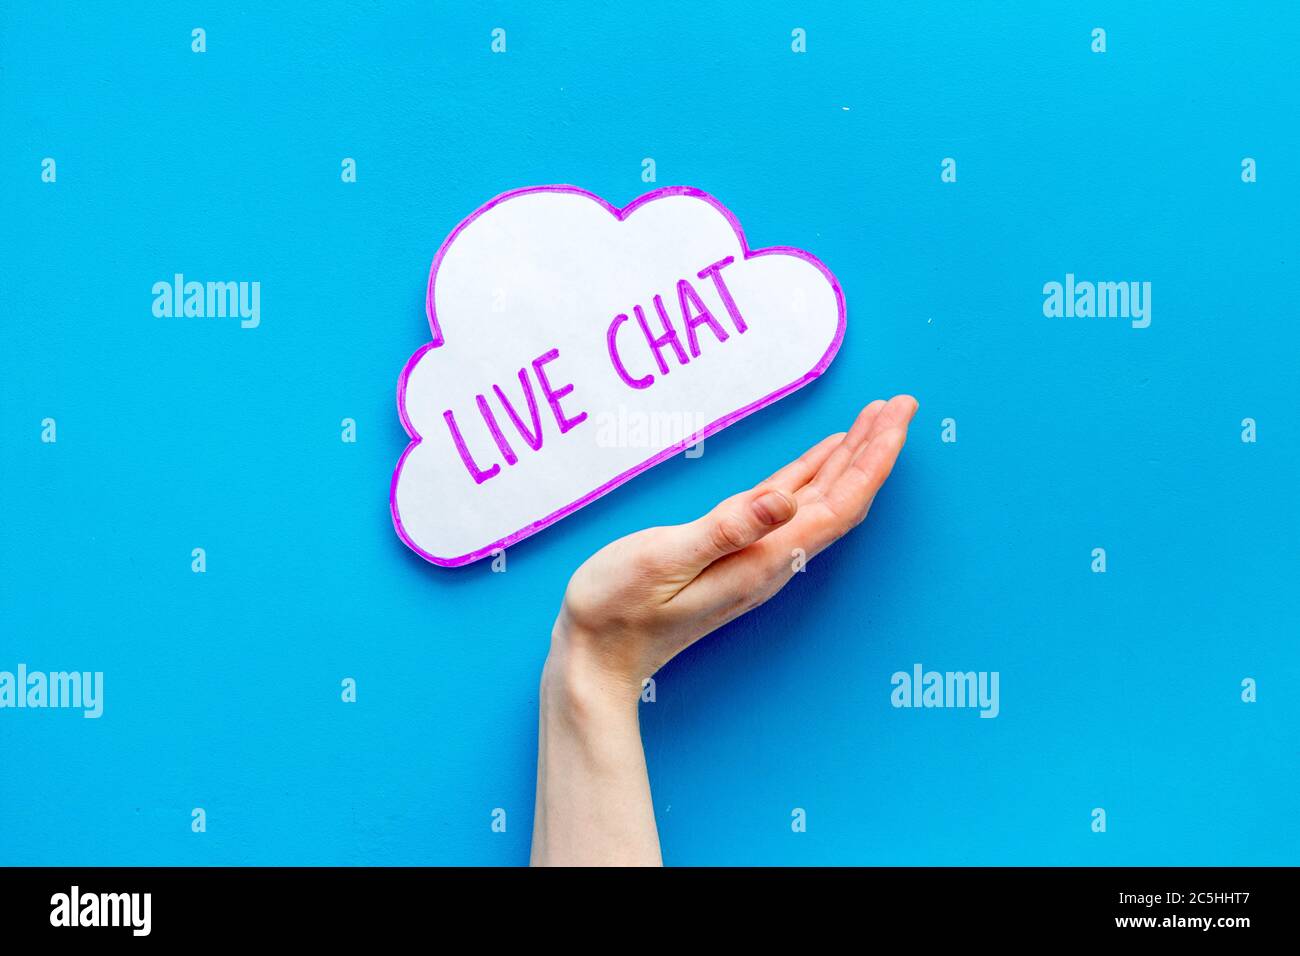 Live chat communication concept - words on blue background top view Stock  Photo - Alamy